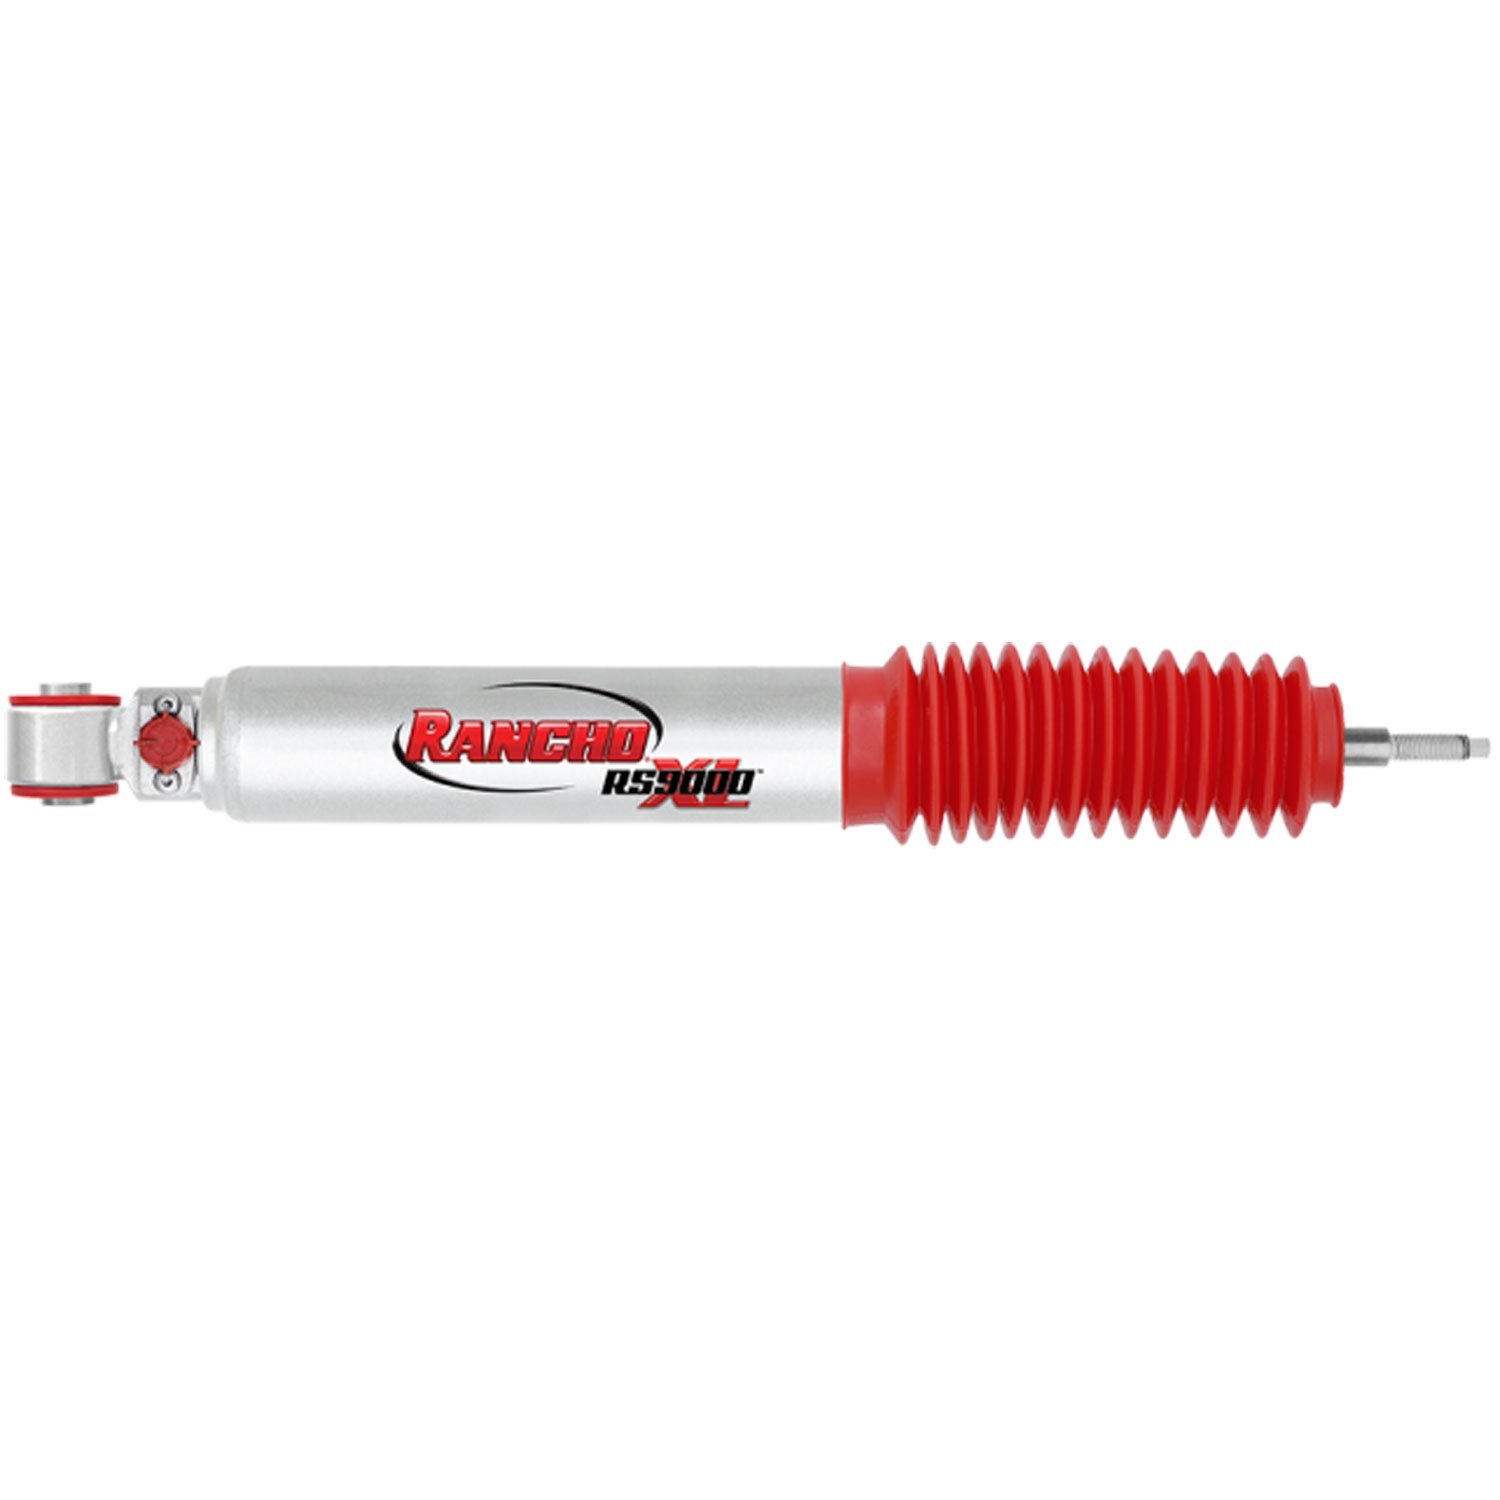 RS9000XL Front Shock Absorber Fits Toyota 4Runner, Pickup and T100